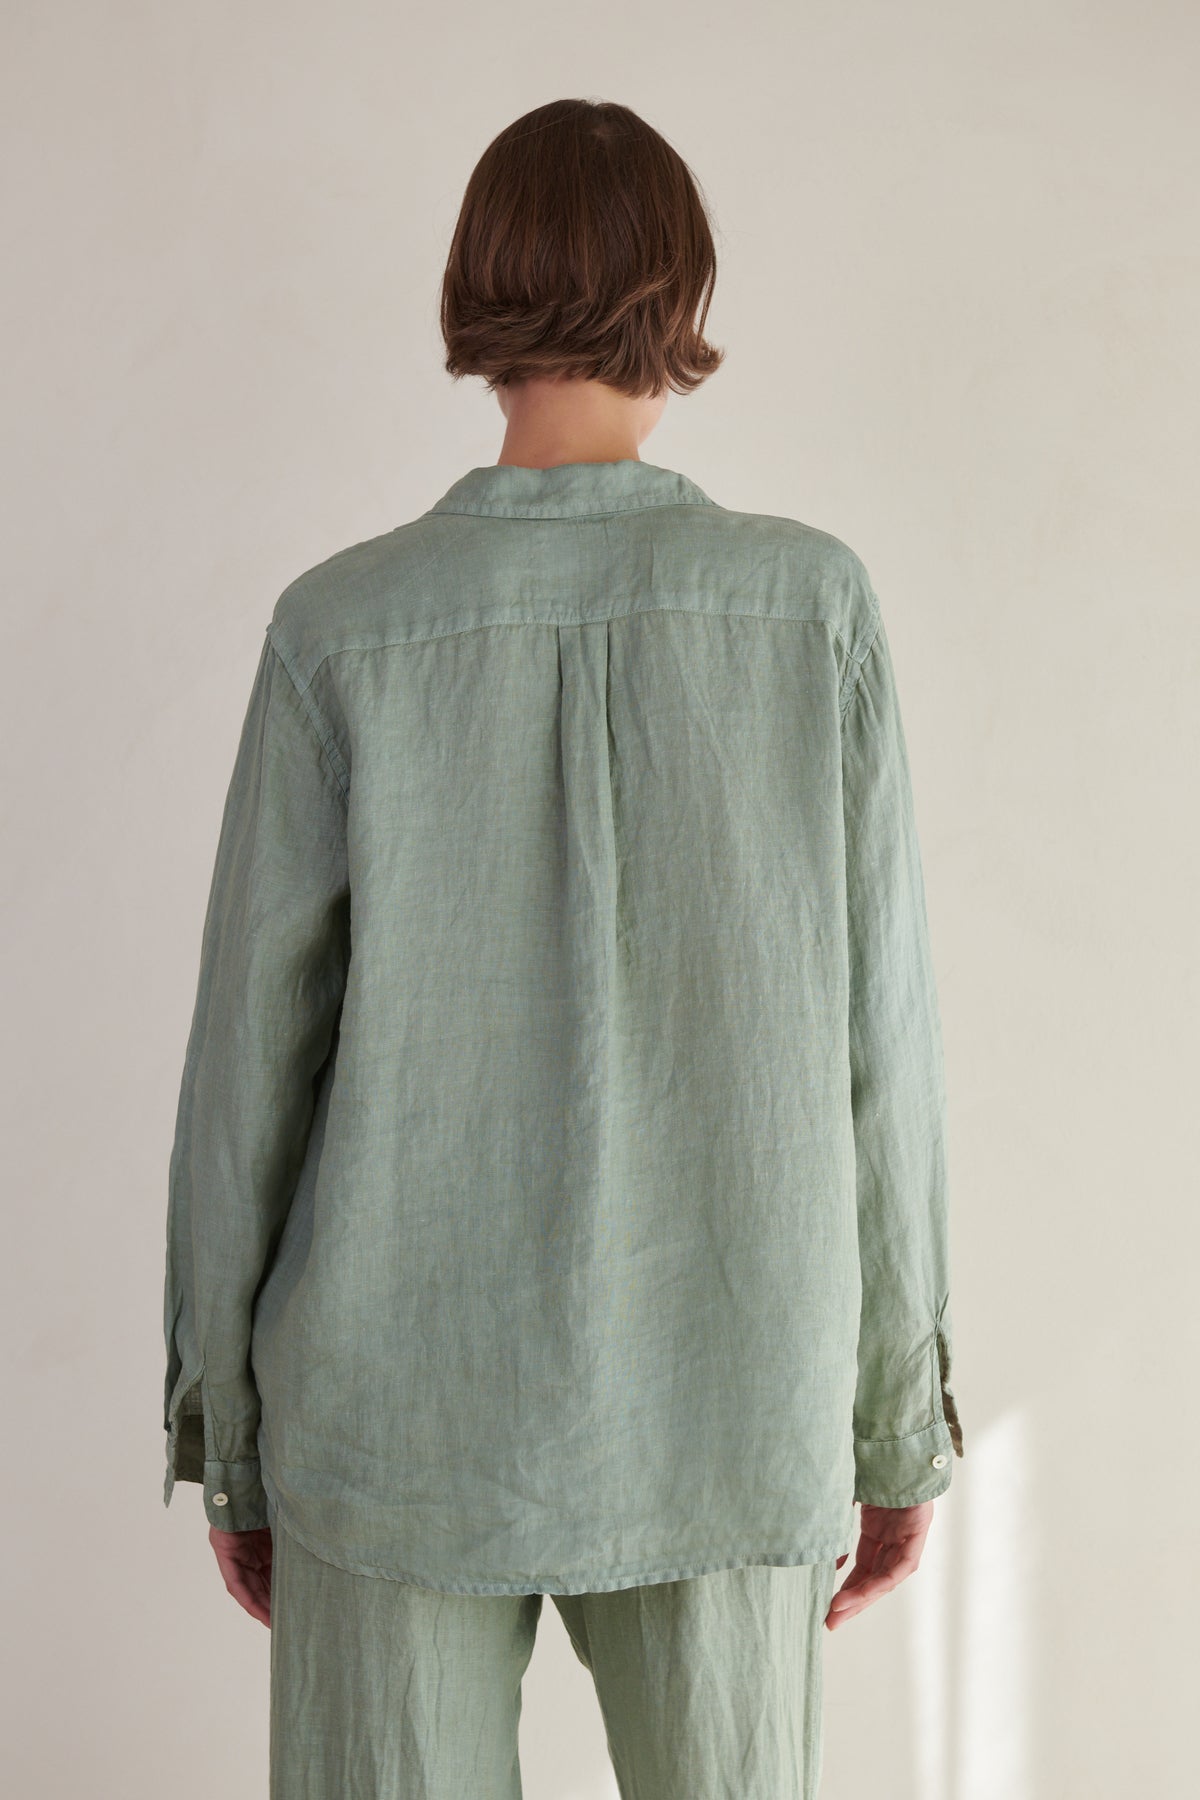 the back view of a woman wearing a Velvet by Jenny Graham Mulholland Shirt and pants.-26293074690241